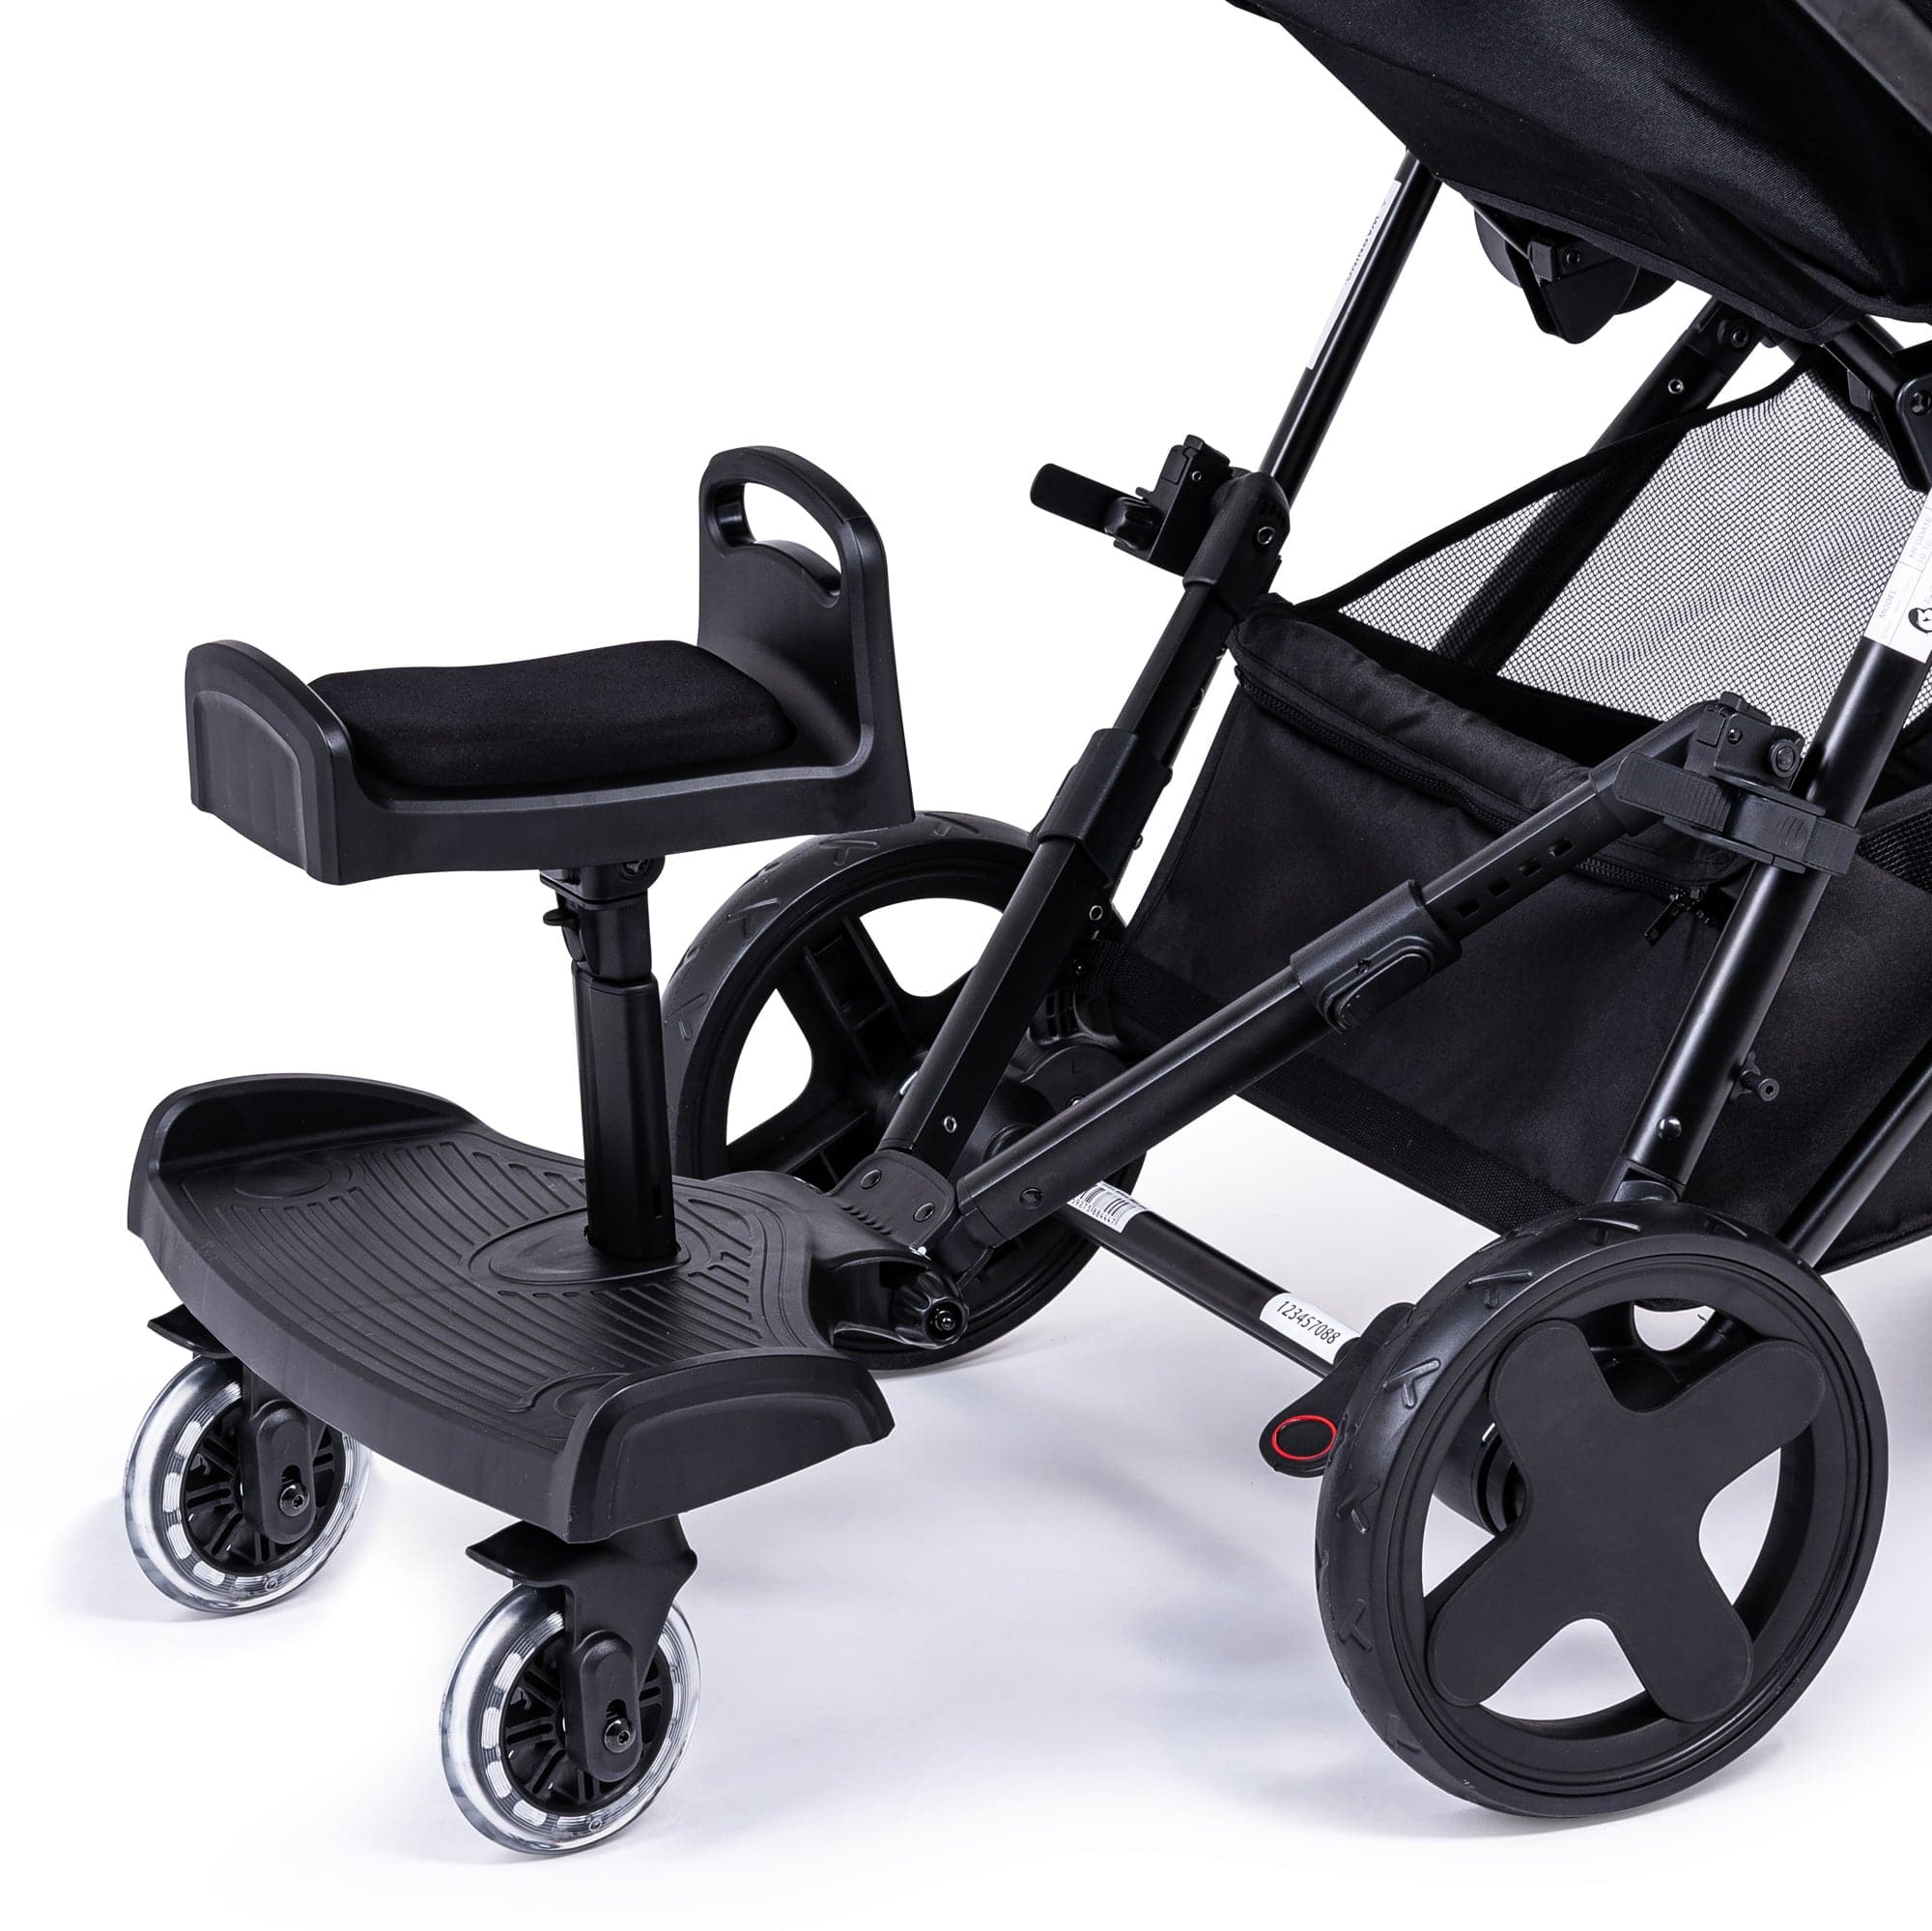 Ride On Board with Saddle Compatible with Cybex - For Your Little One